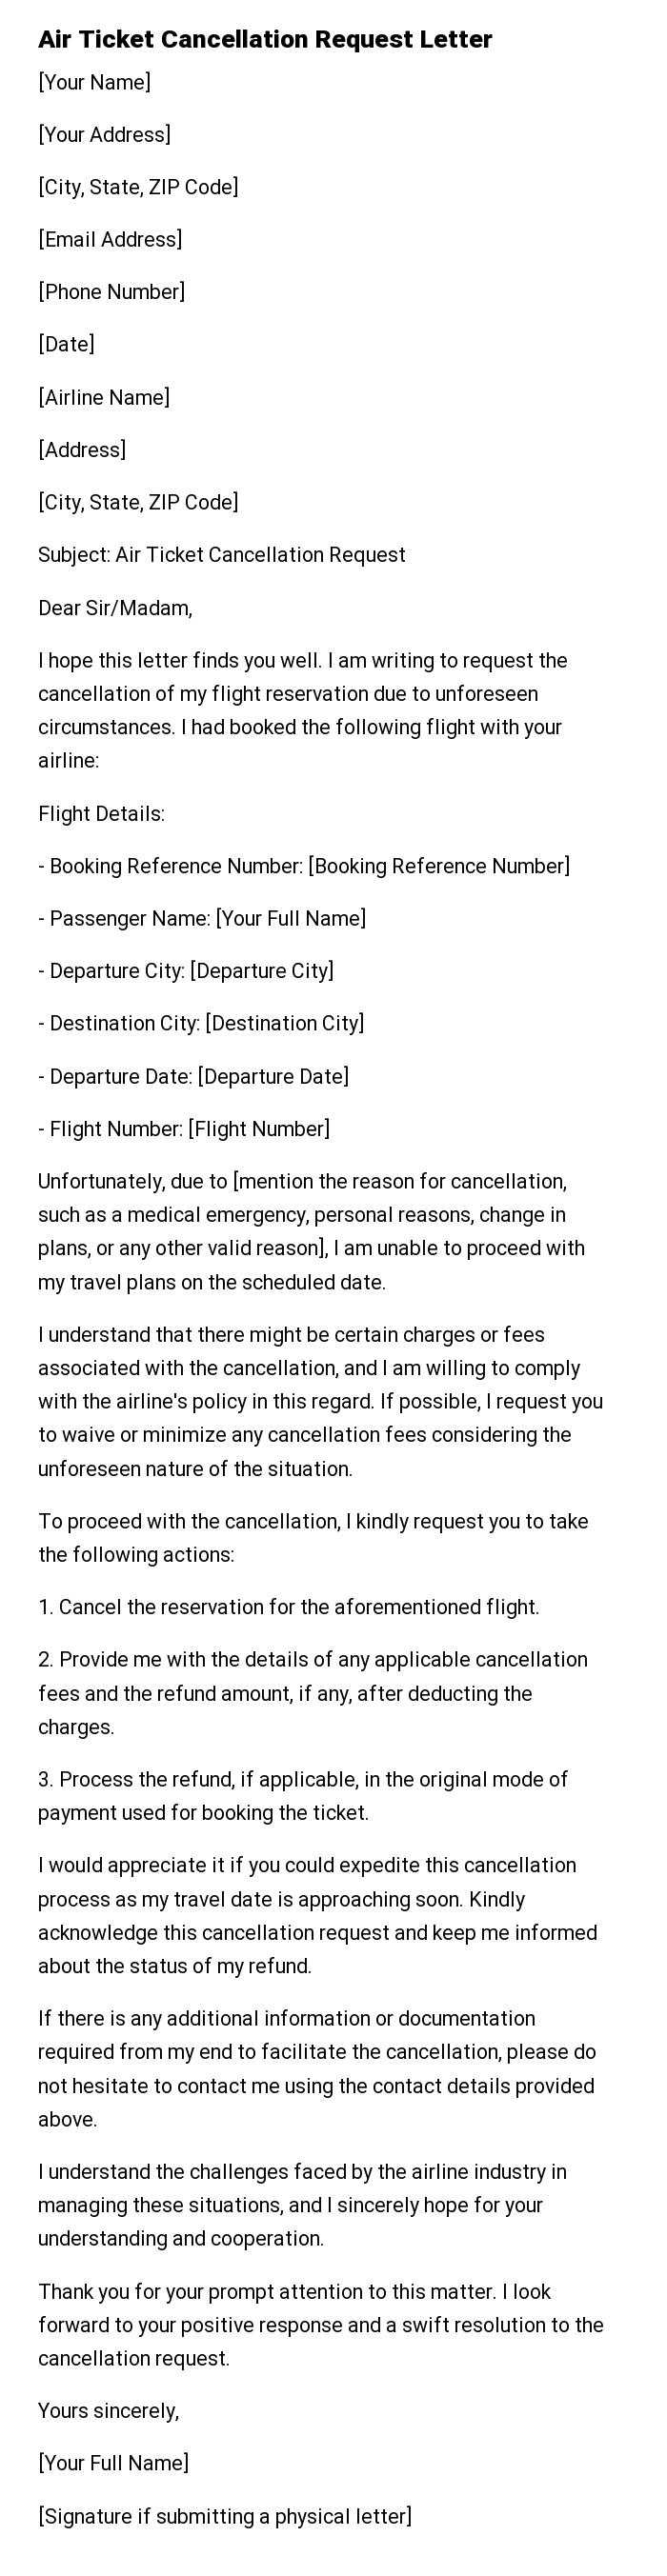 Air Ticket Cancellation Request Letter